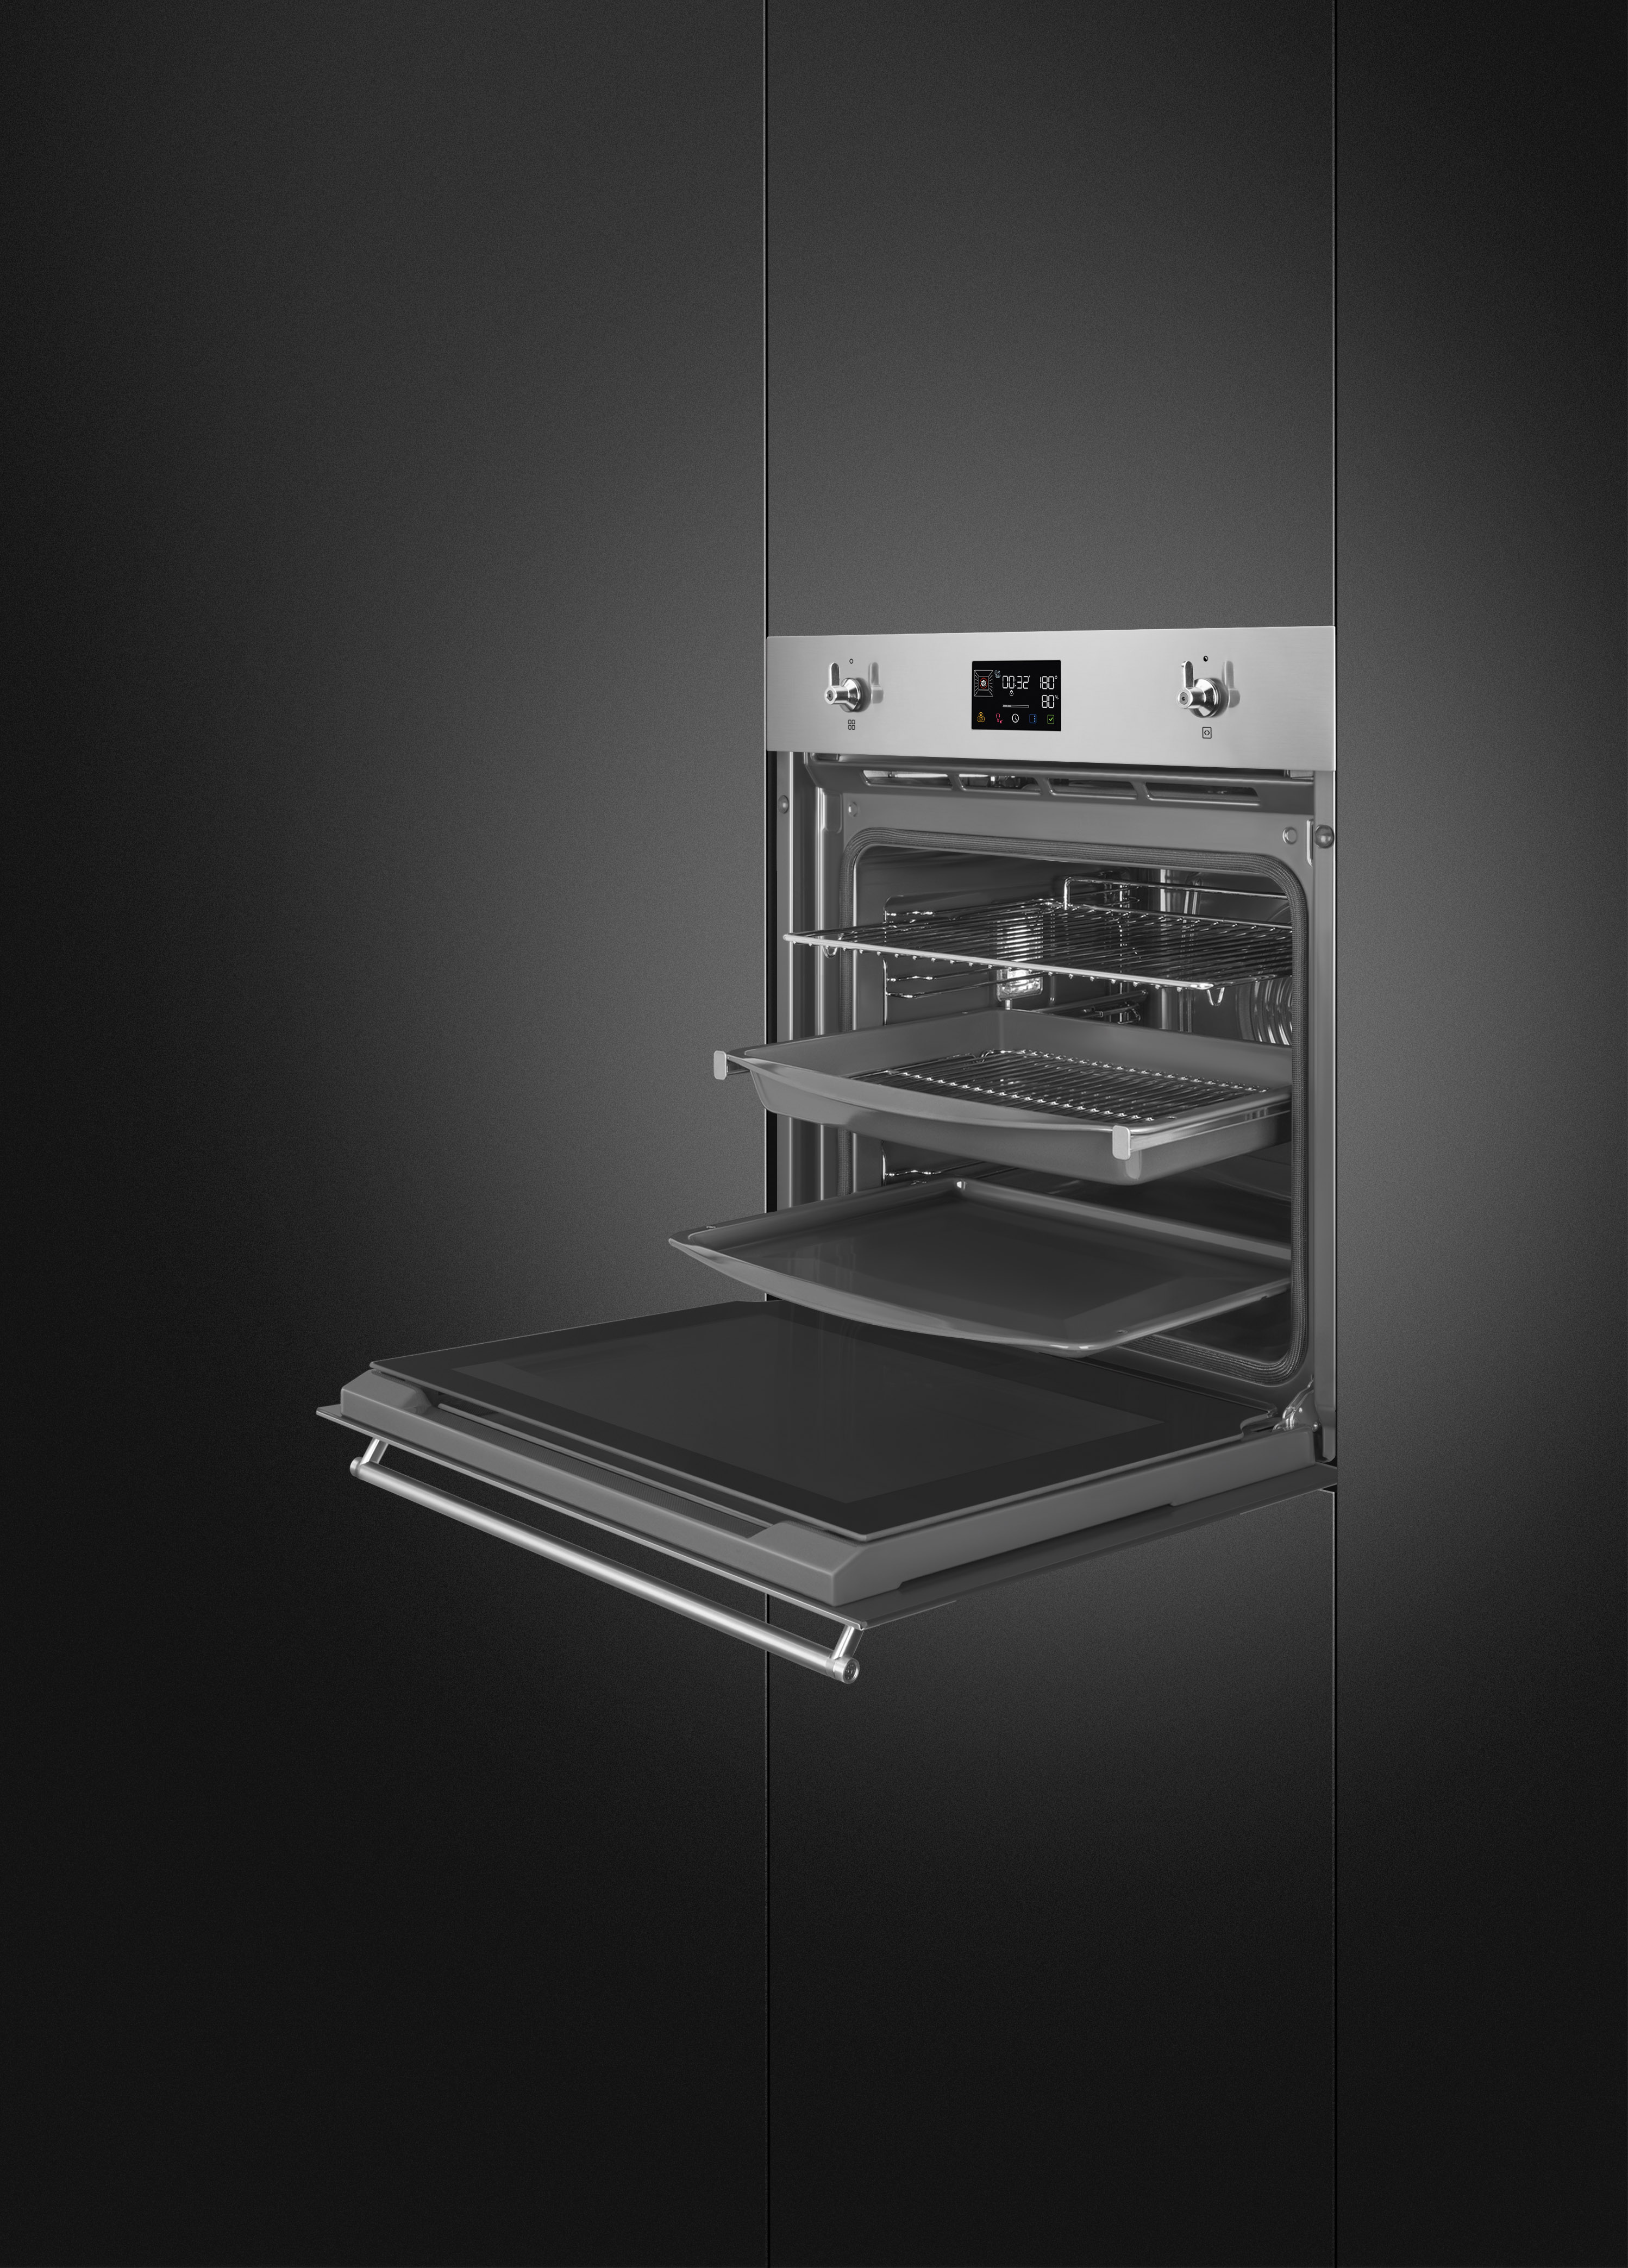 Stainless steel SteamOne Galileo Oven.  60cm. Built-in. Smeg_7